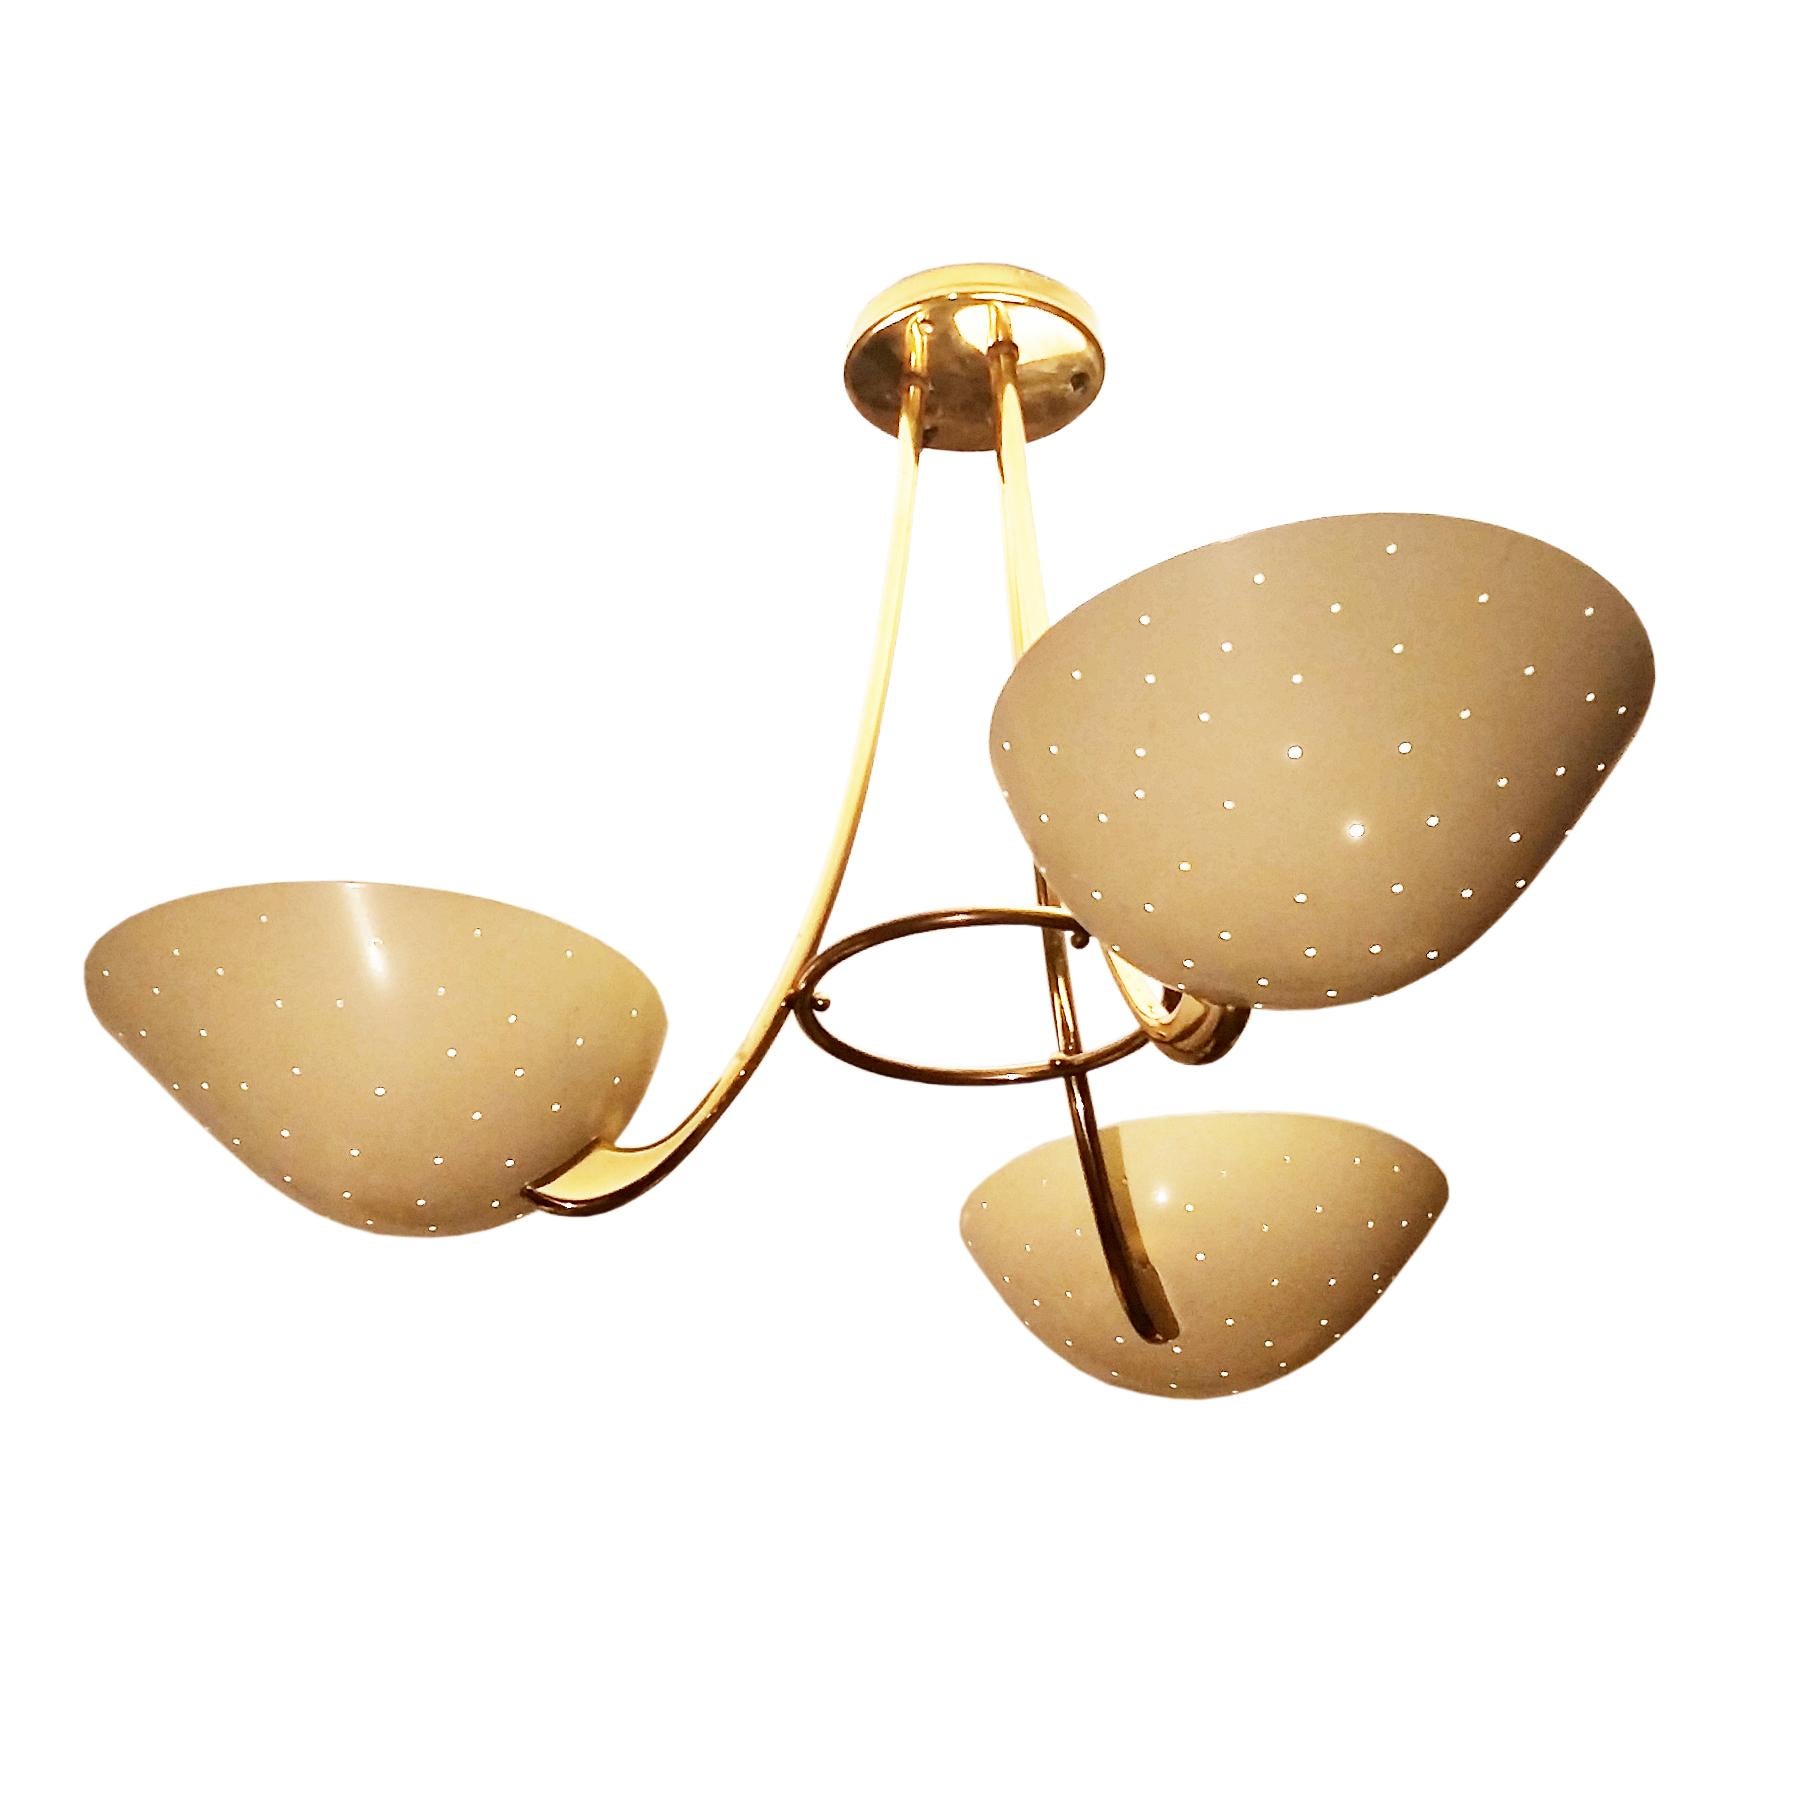 BAG Turgi chandelier from the 1950s, with three bulbs.
The Bronzewarenfabrik AG is an iconic Swiss company, that started in 1909 to produce very high end bronze items, such as lighting. The quality and the design is a good example of the 